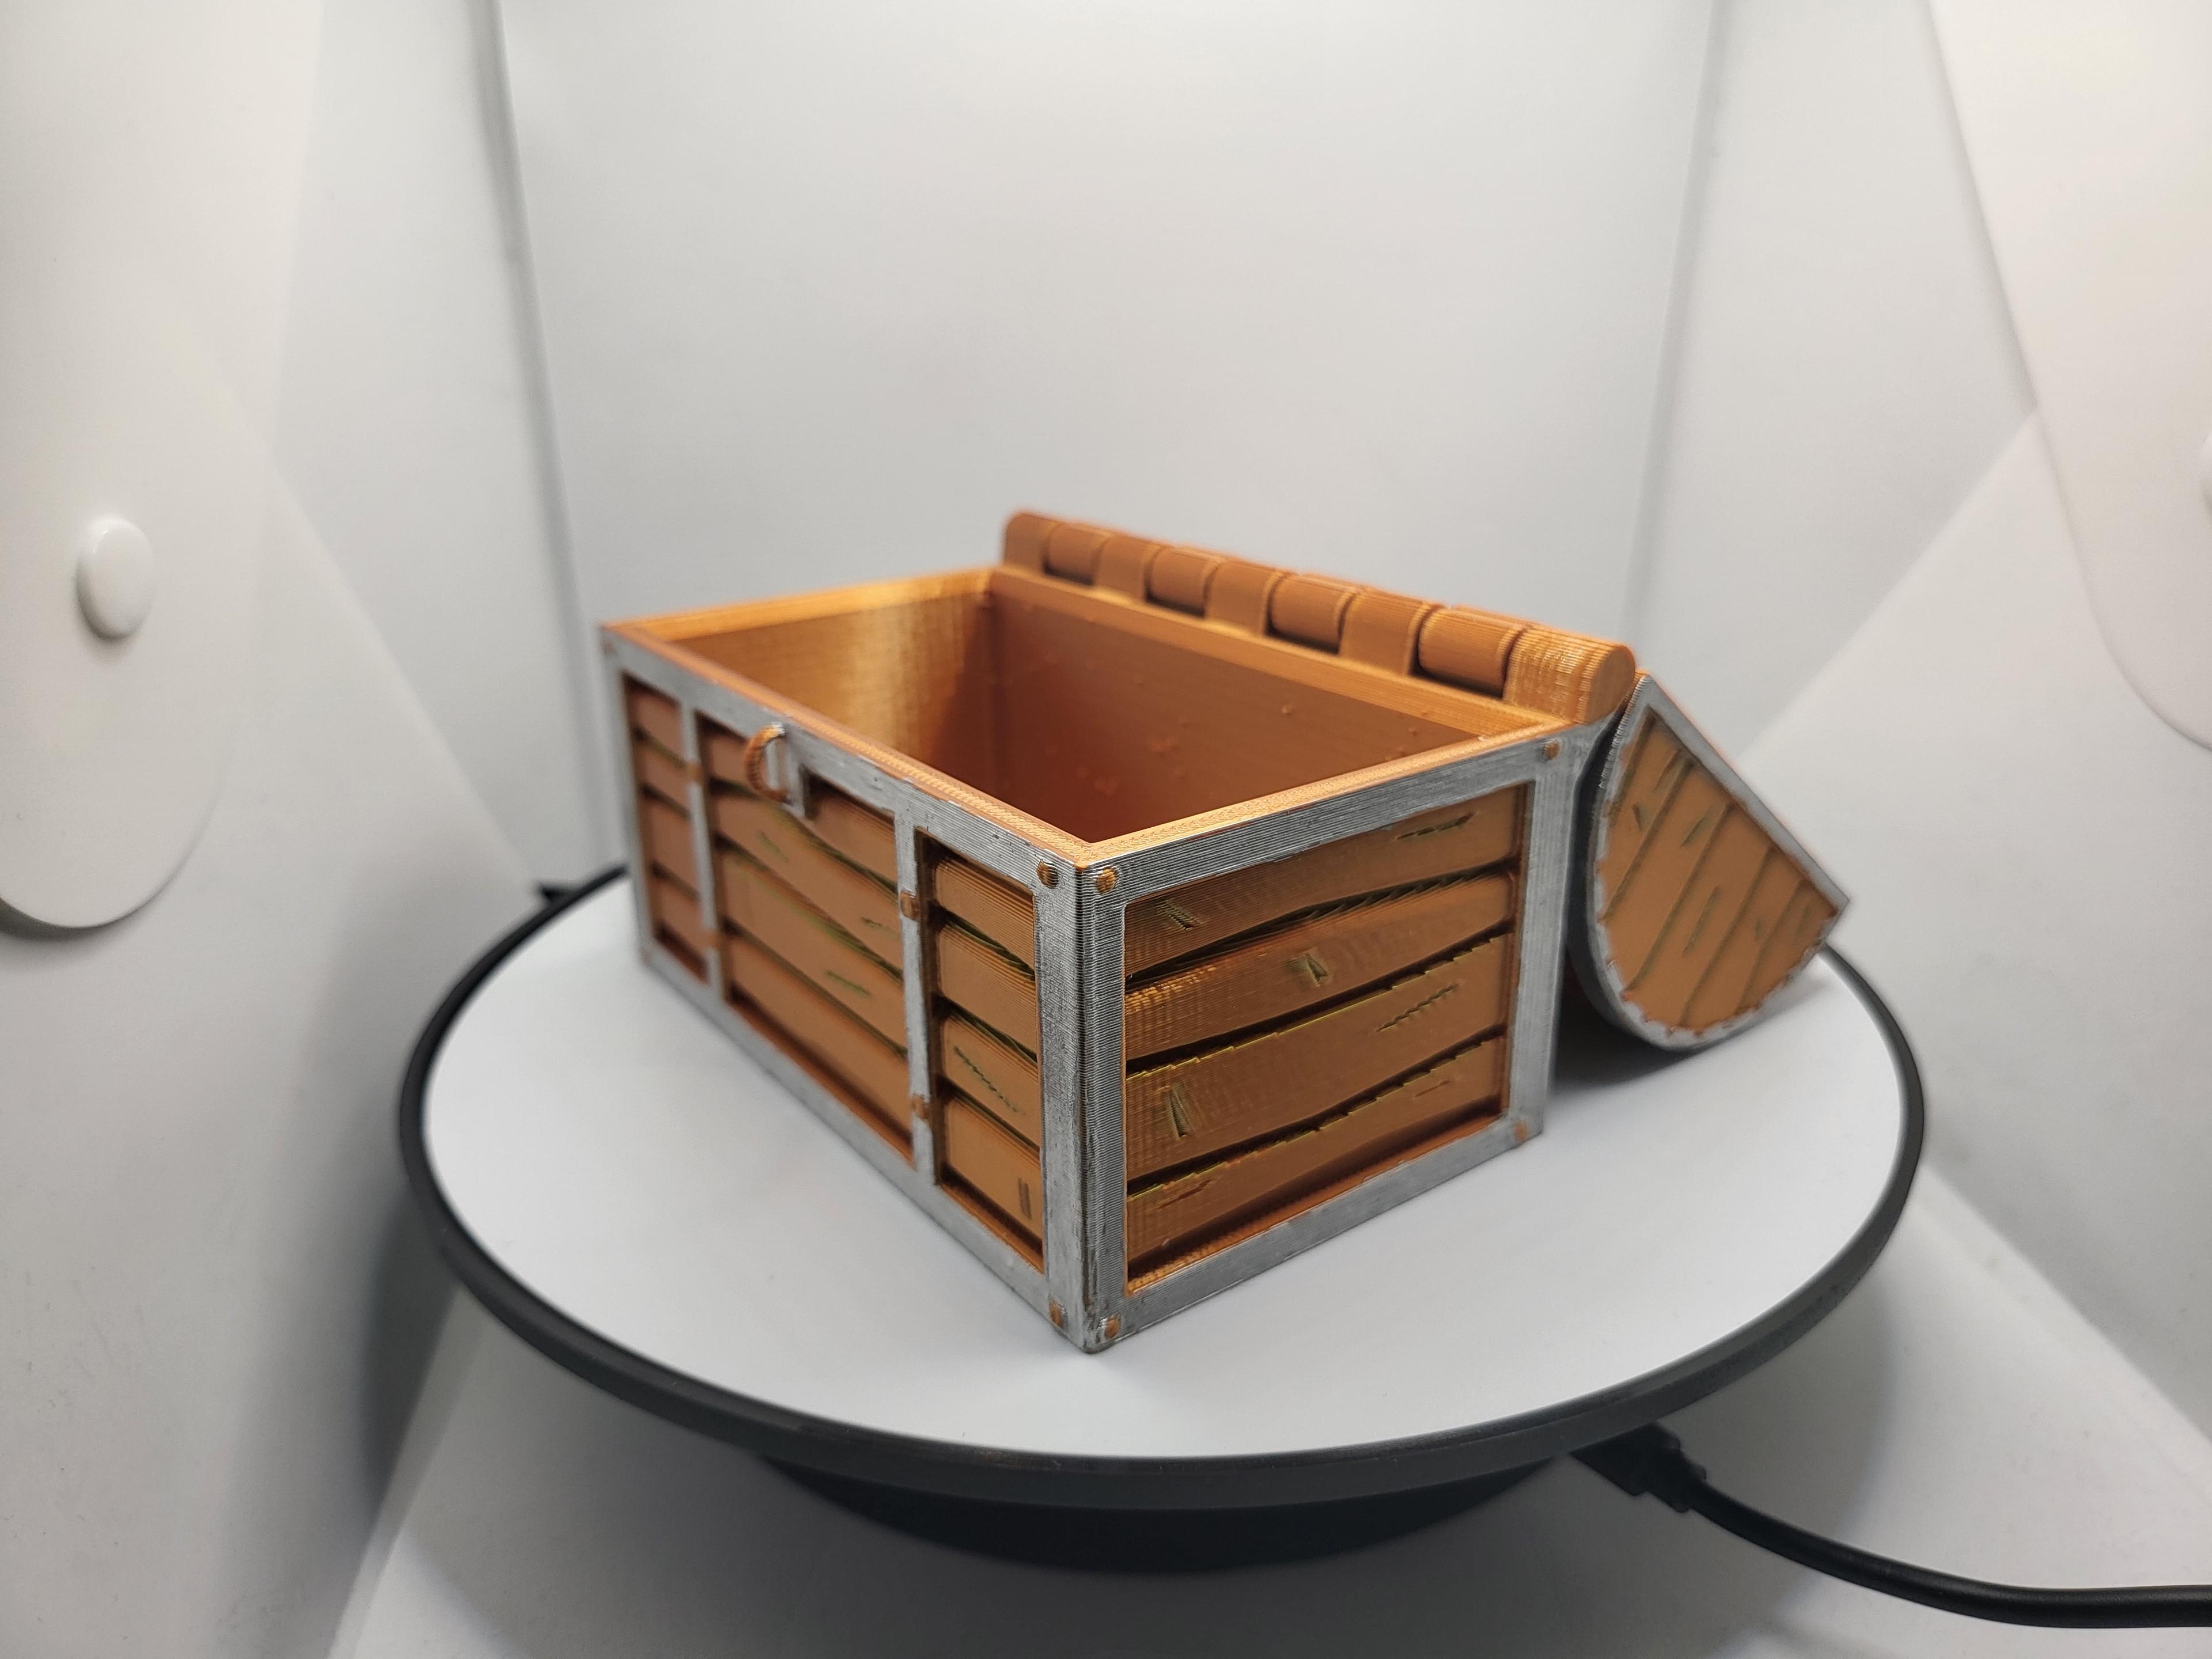 Pirate Chest With Print In Place Hinged Lid (easy print) 3d model